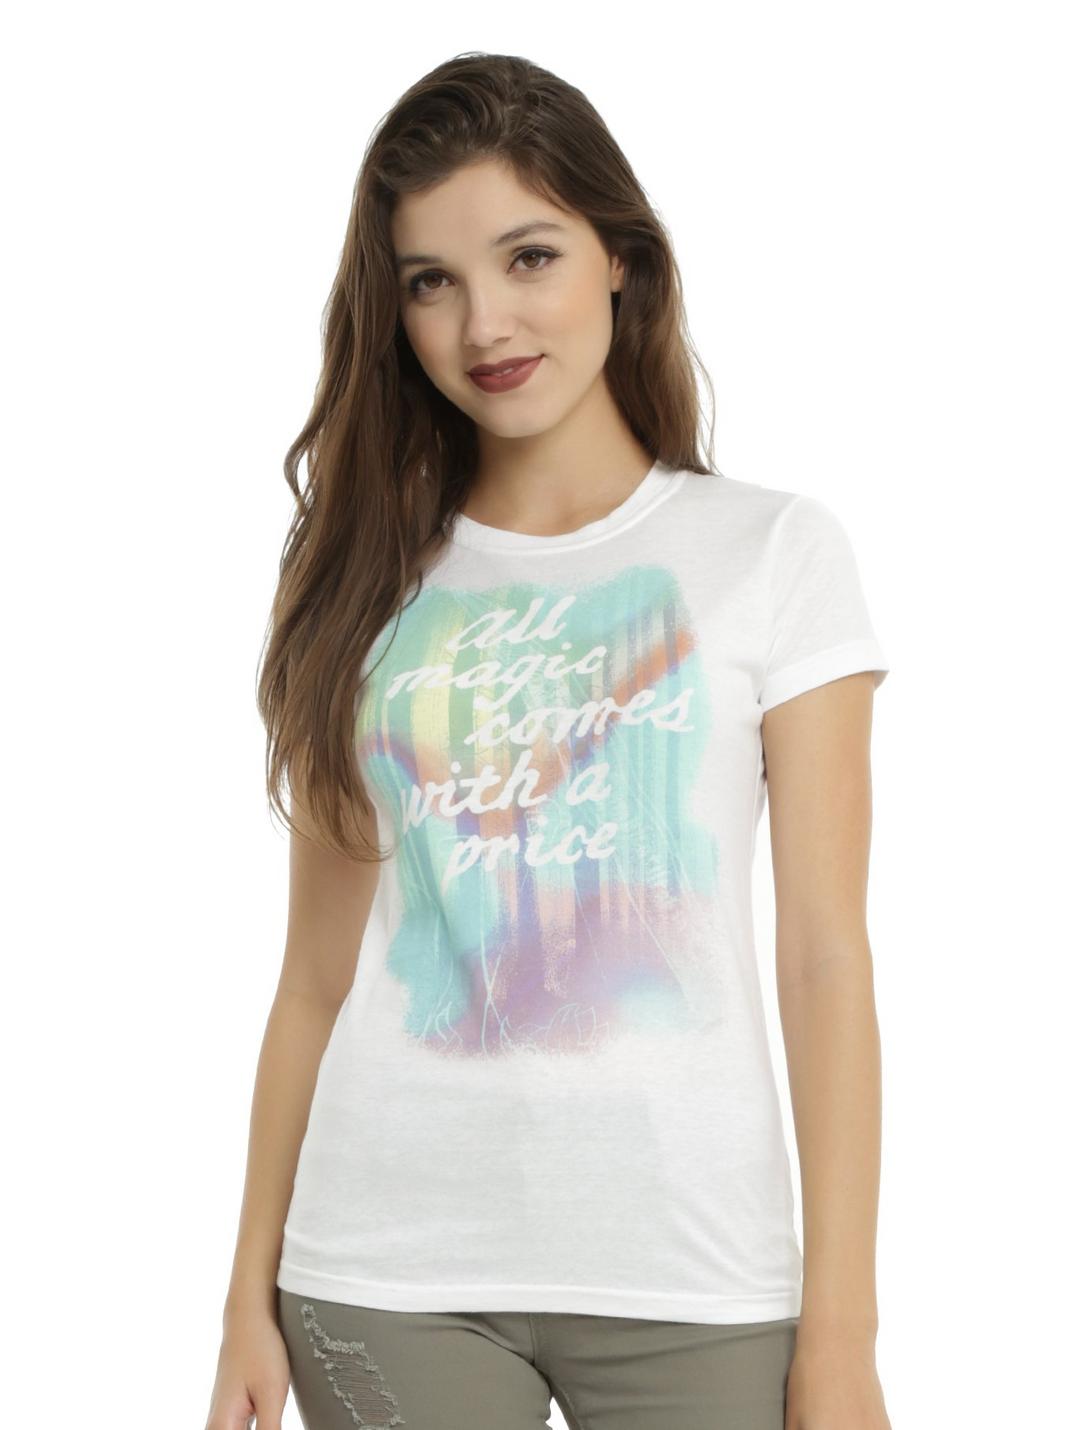 Once Upon A Time Magic Comes With A Price Girls T-Shirt, WHITE, hi-res